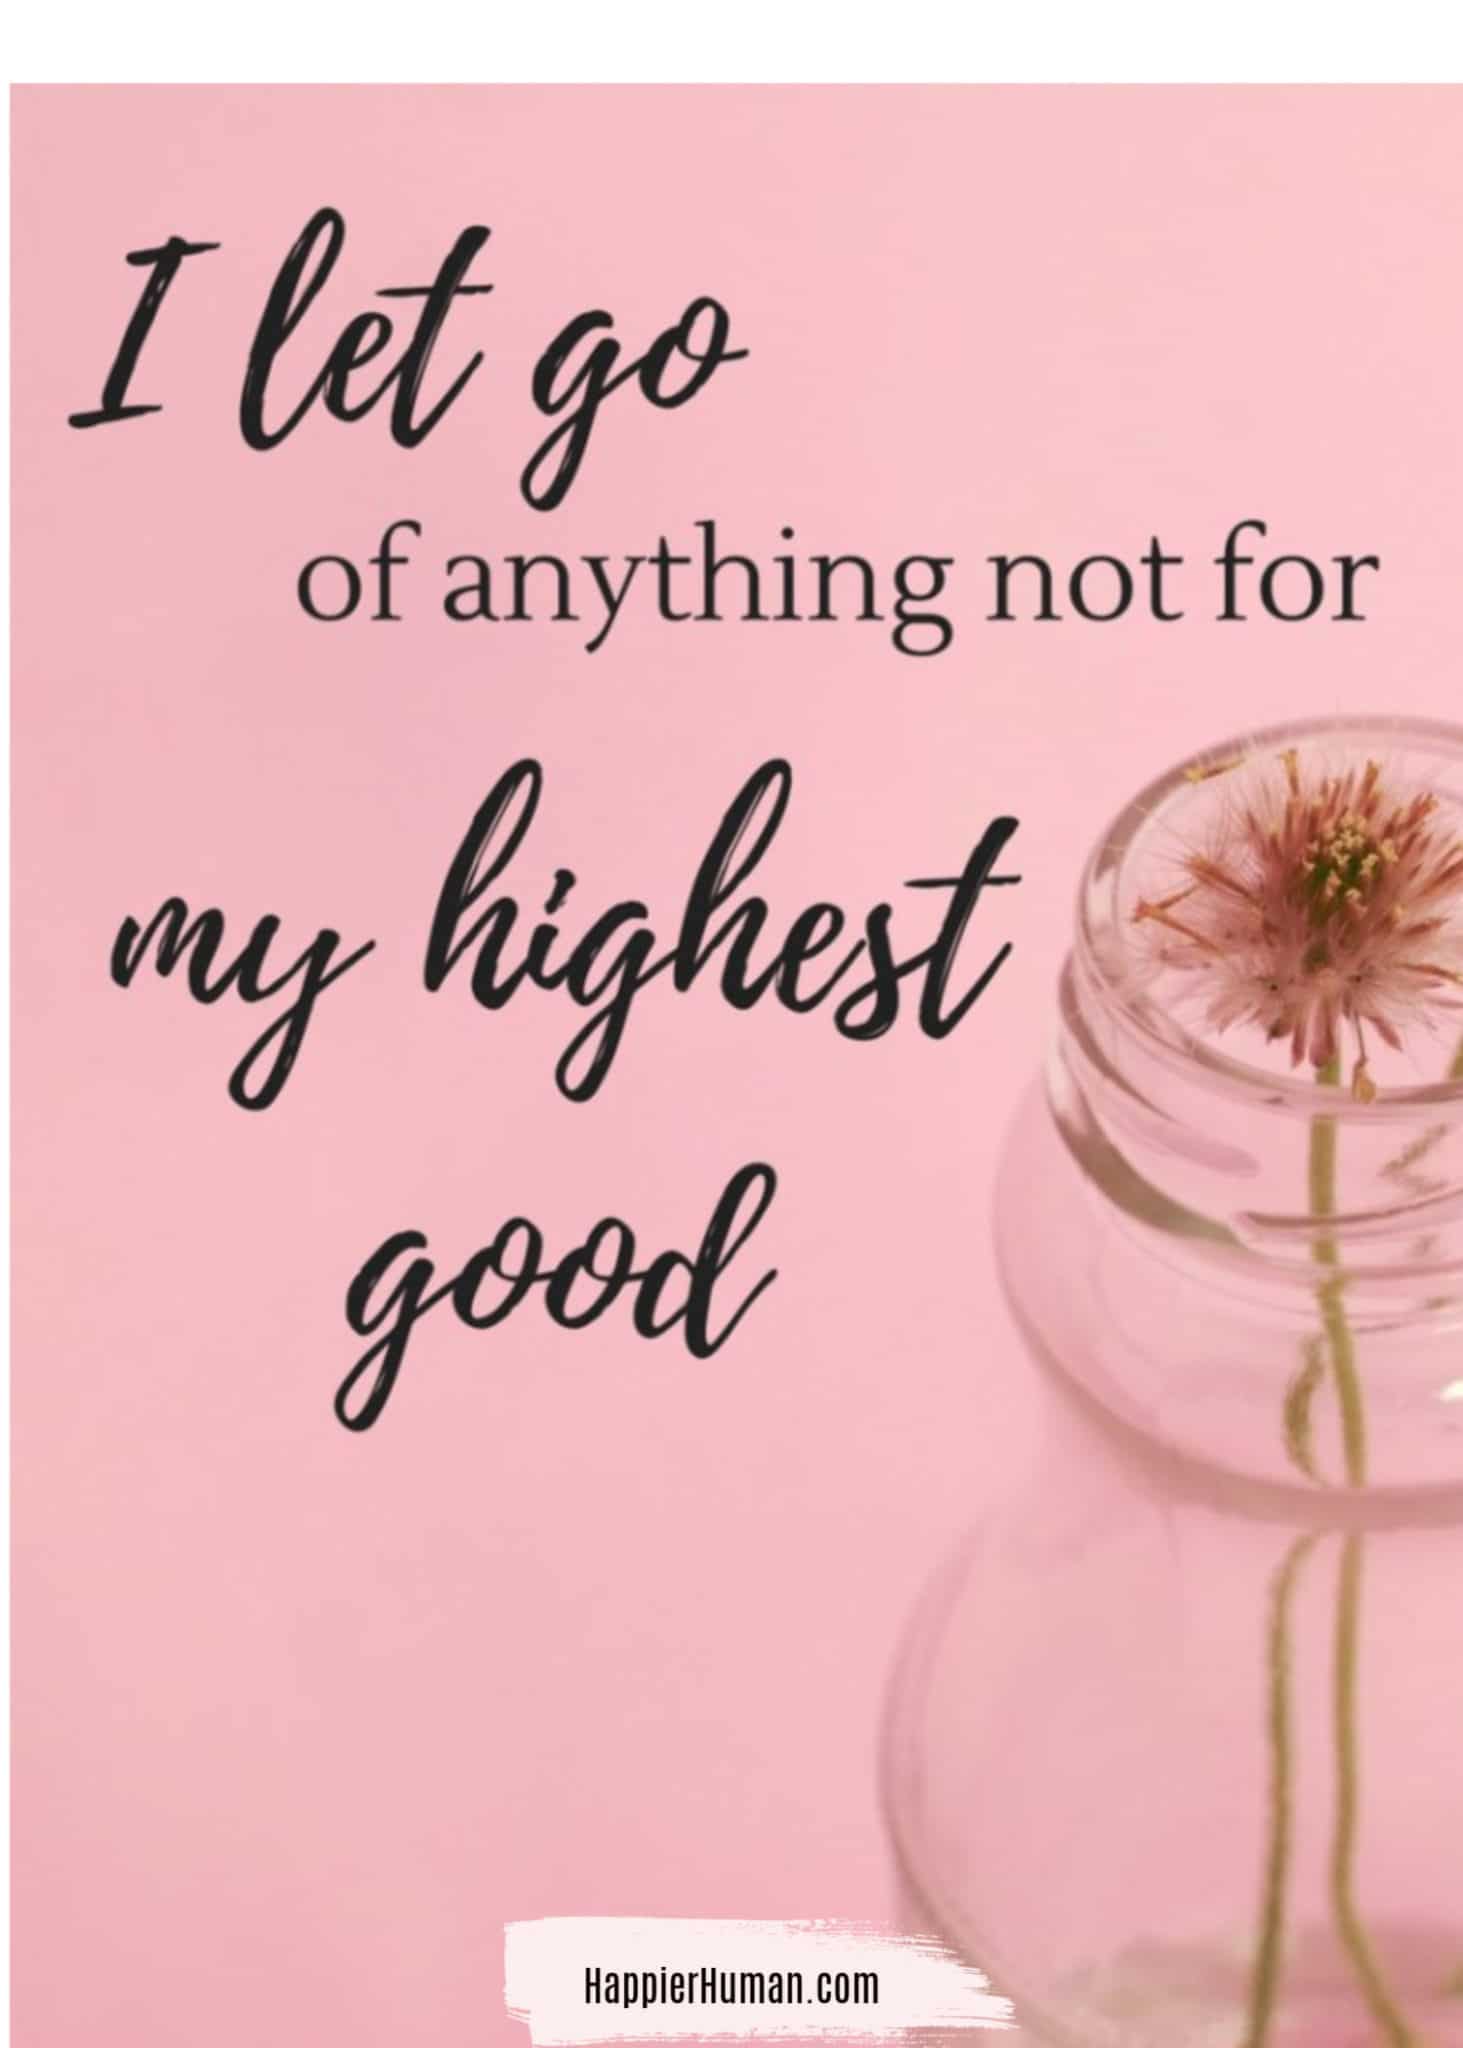 I let go of anything not for my highest good